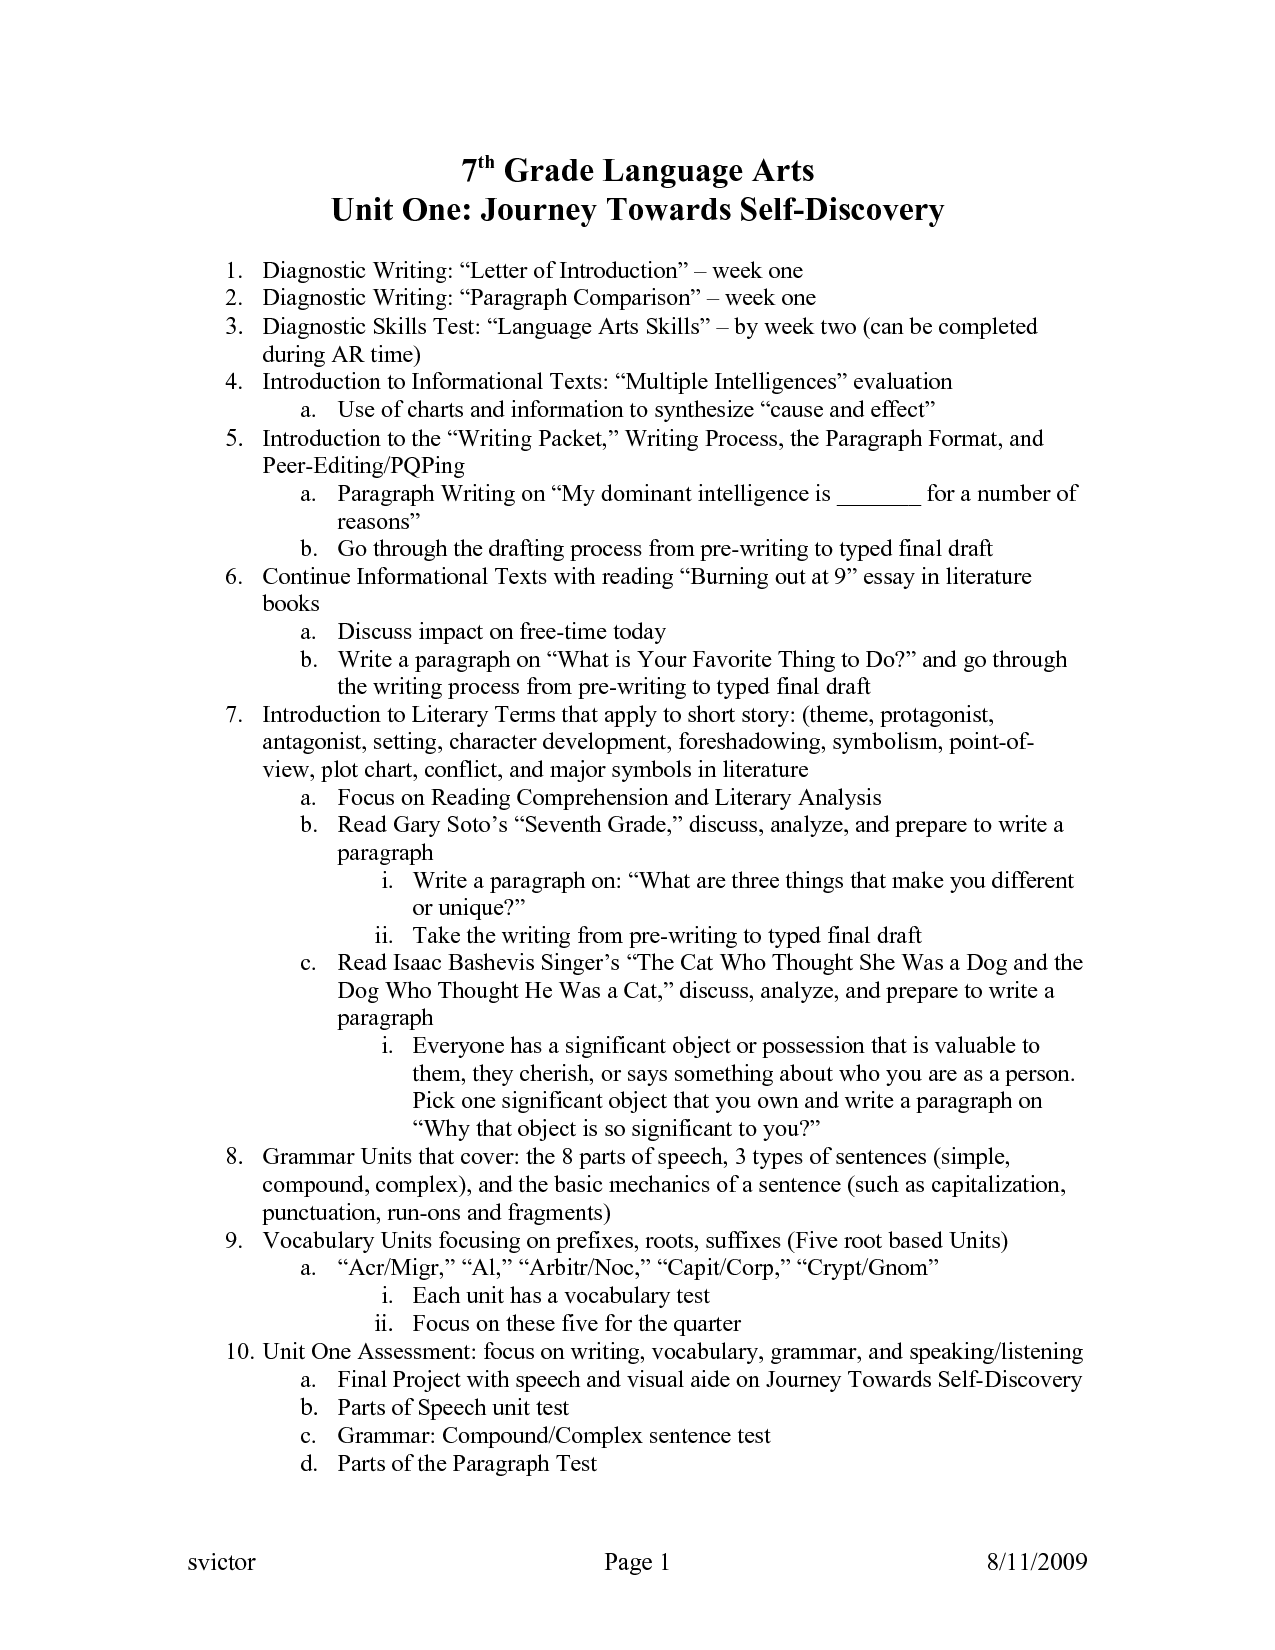 Essay about benefits of reading books